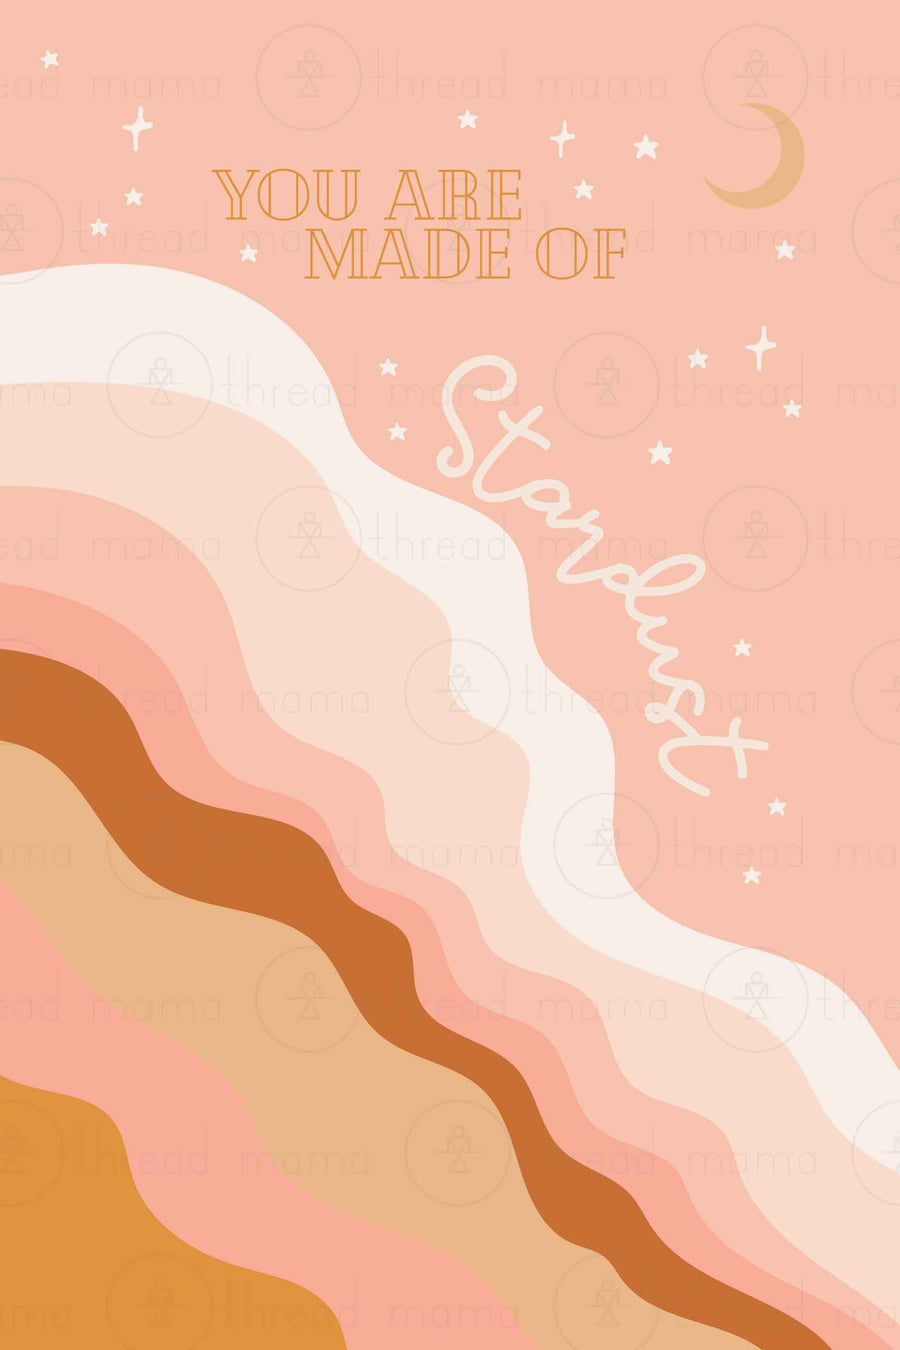 You are made of stardust. (Printable Poster)